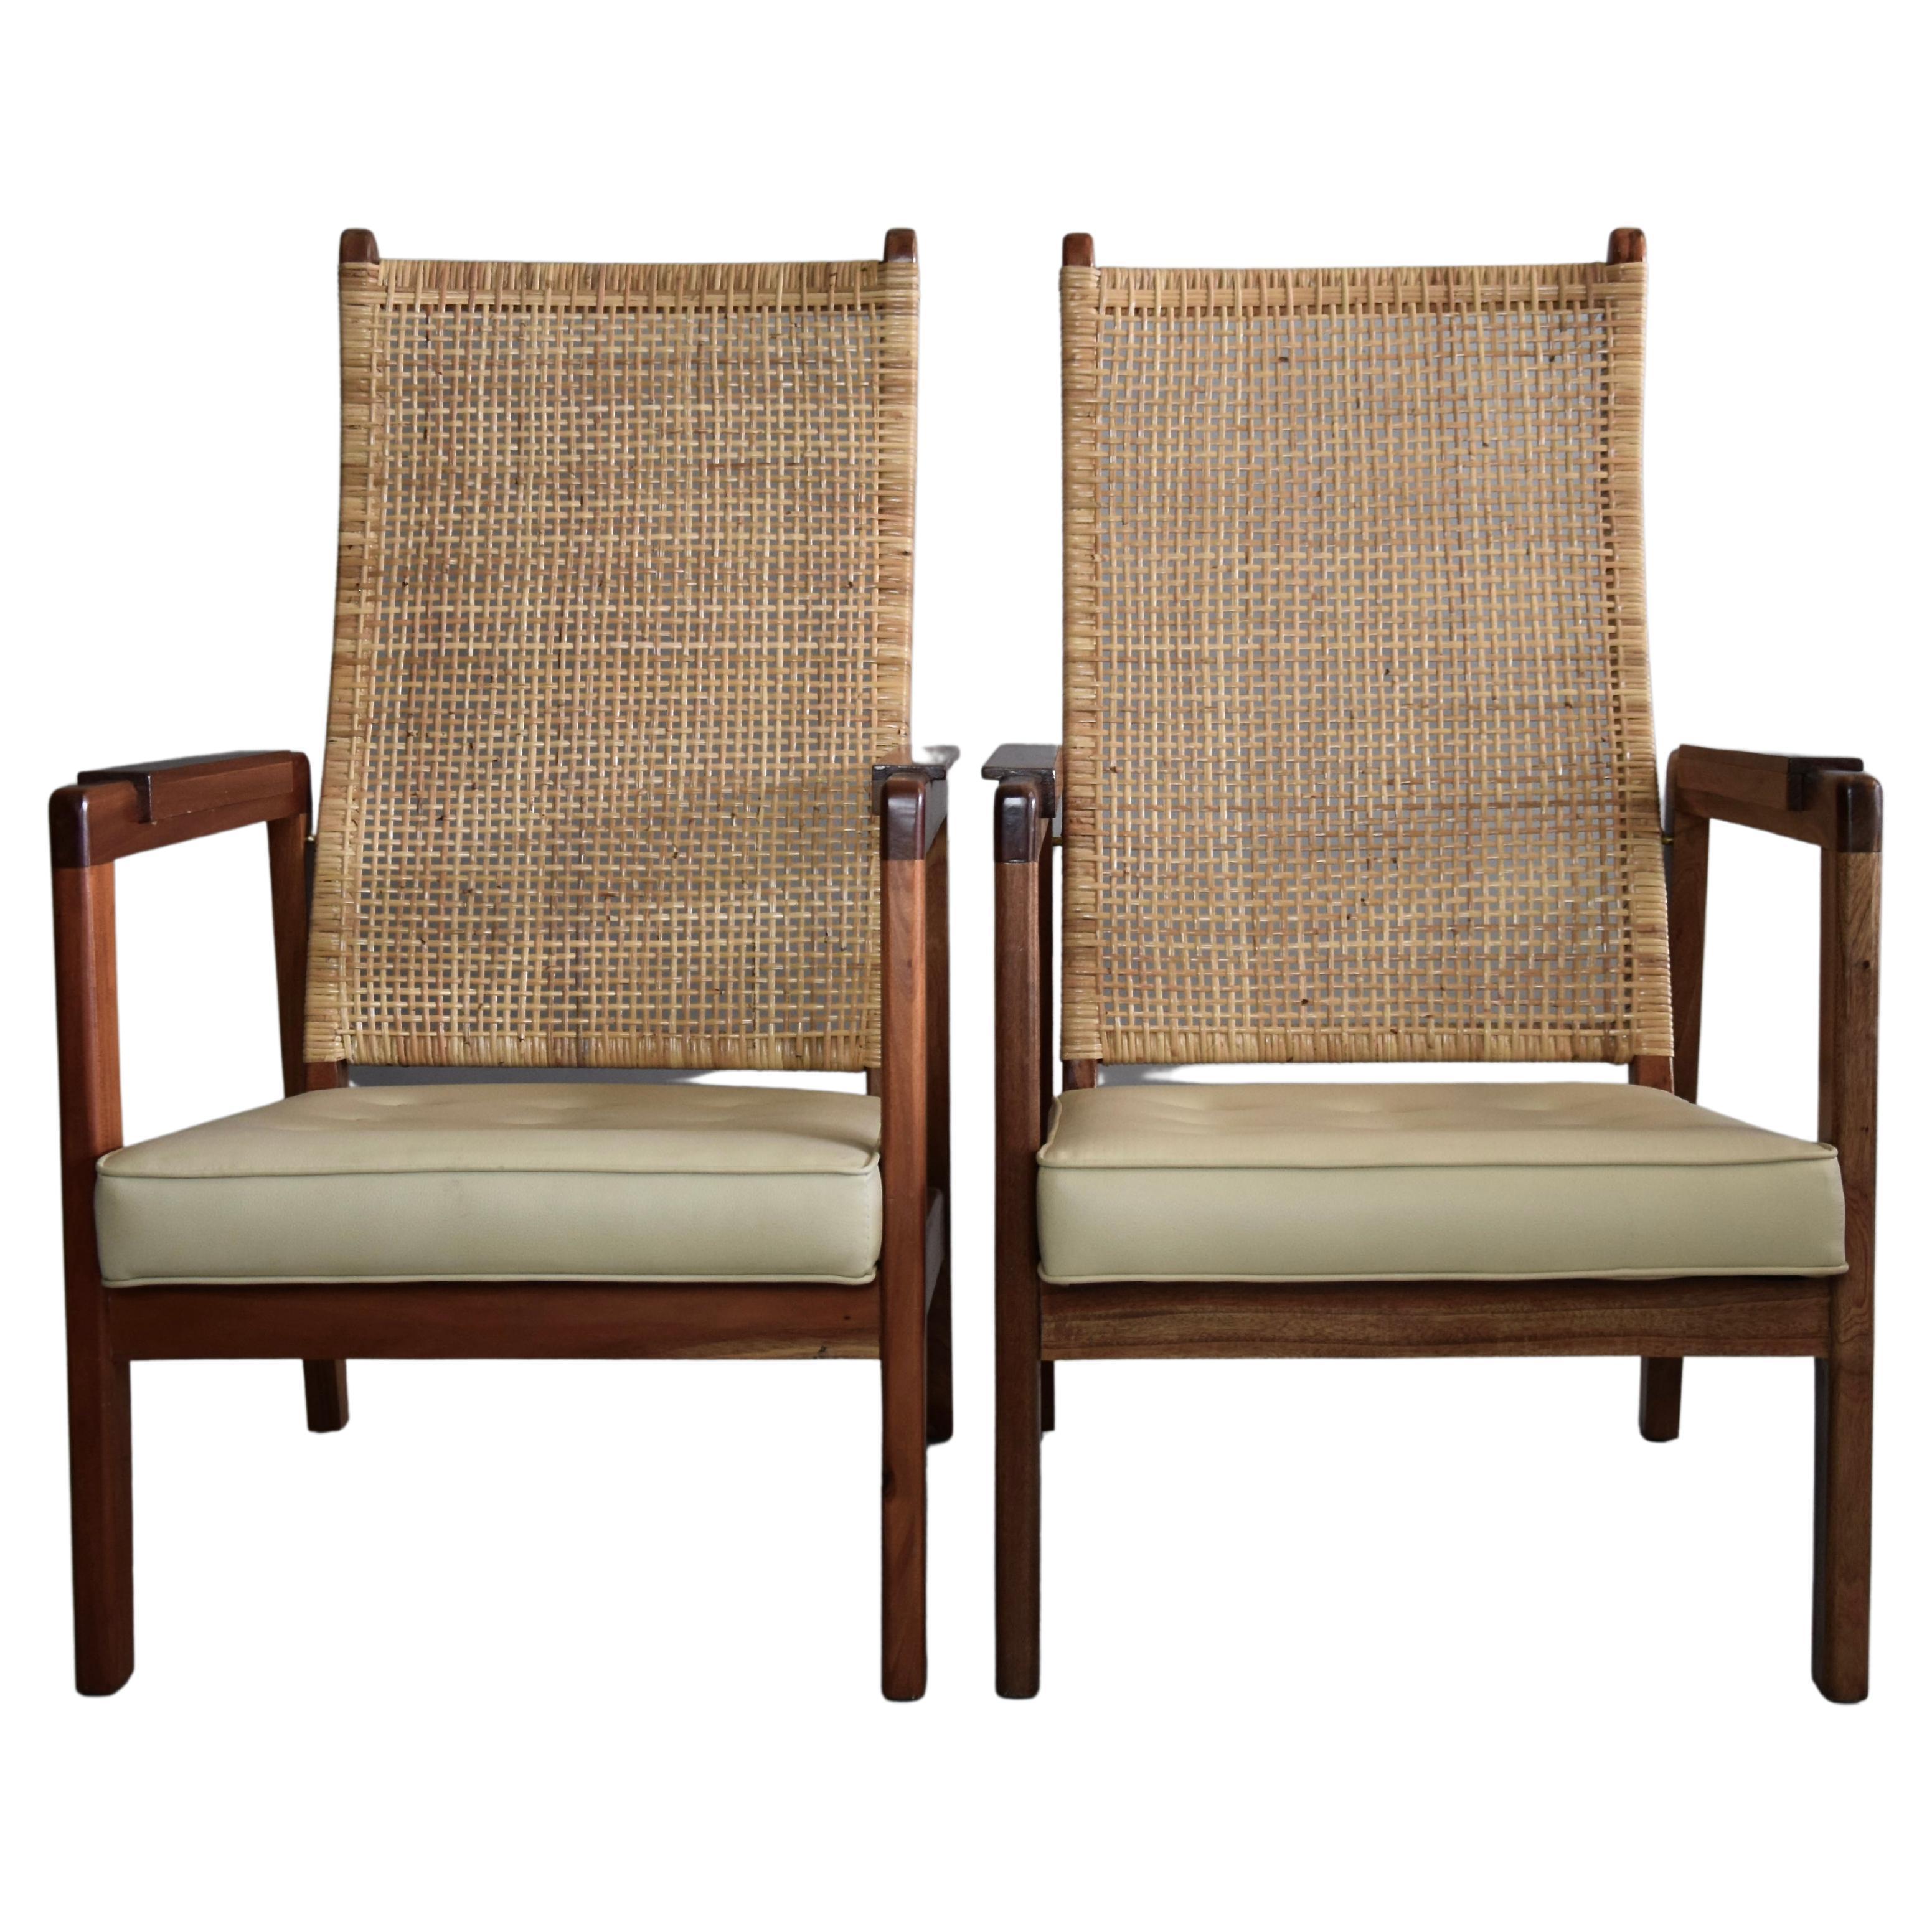 Mid-Century Modern Lounge Chairs in Wood and Cane, Set of 2 For Sale